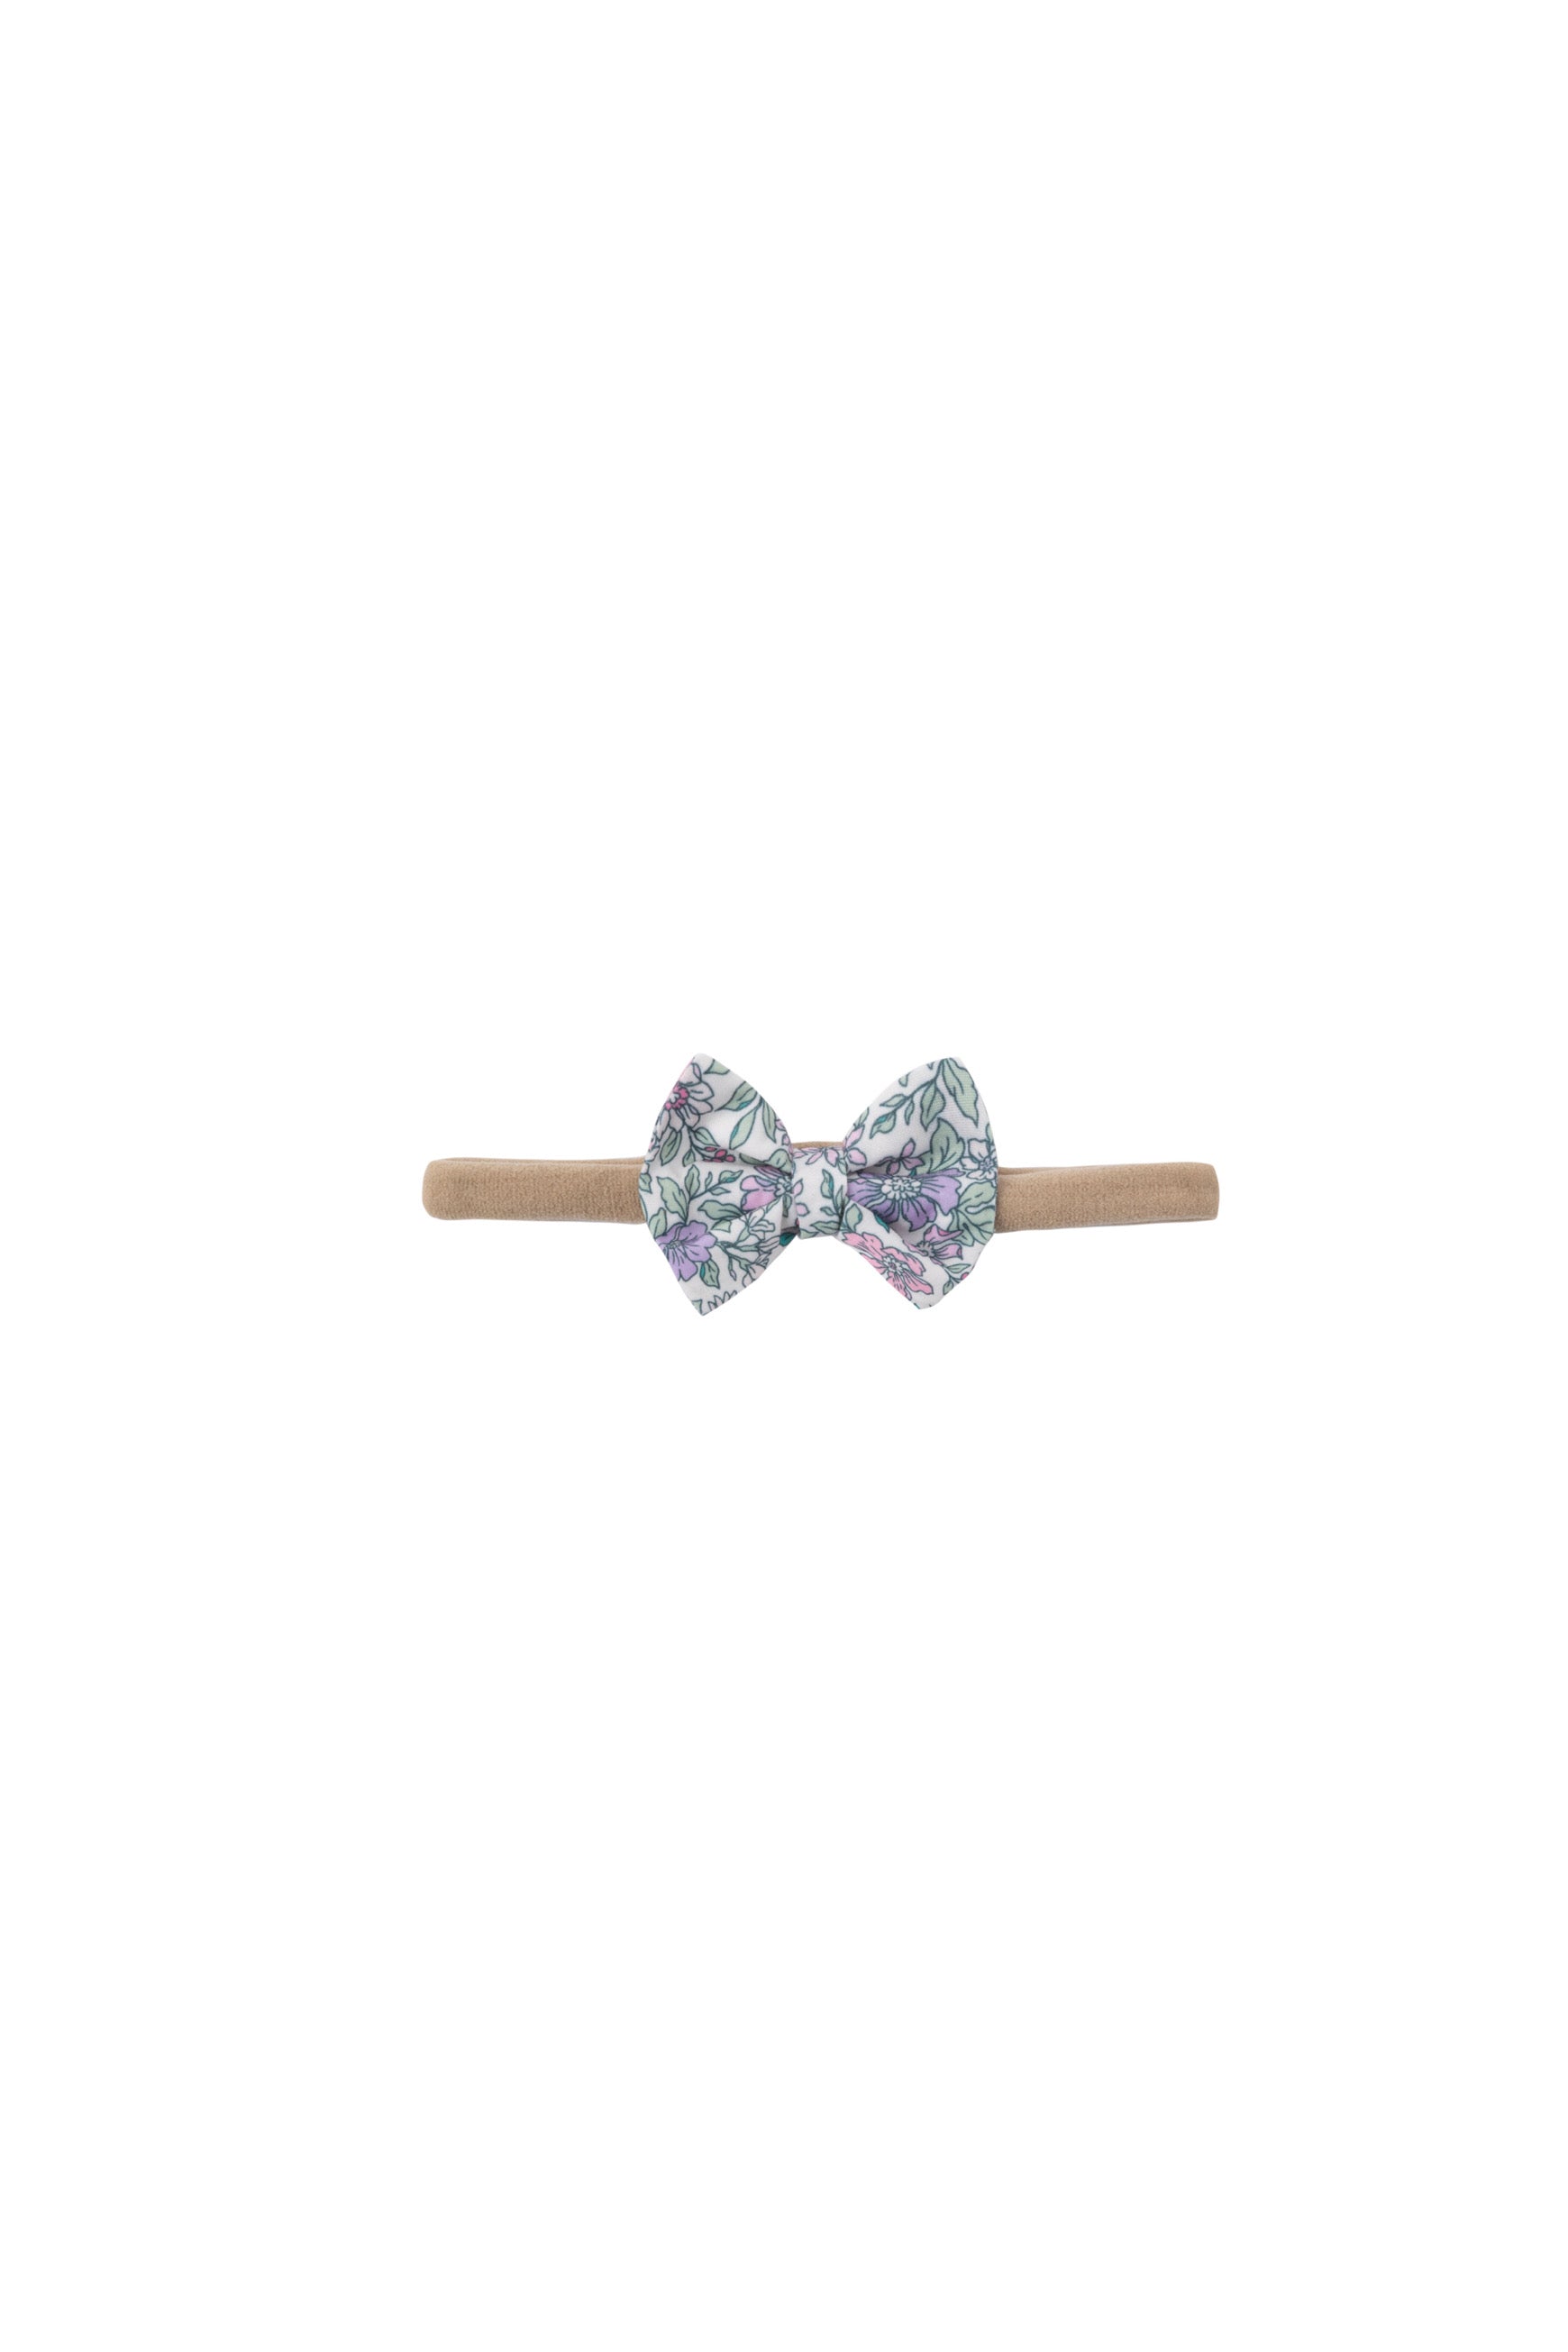 Posy blossom hair accessories